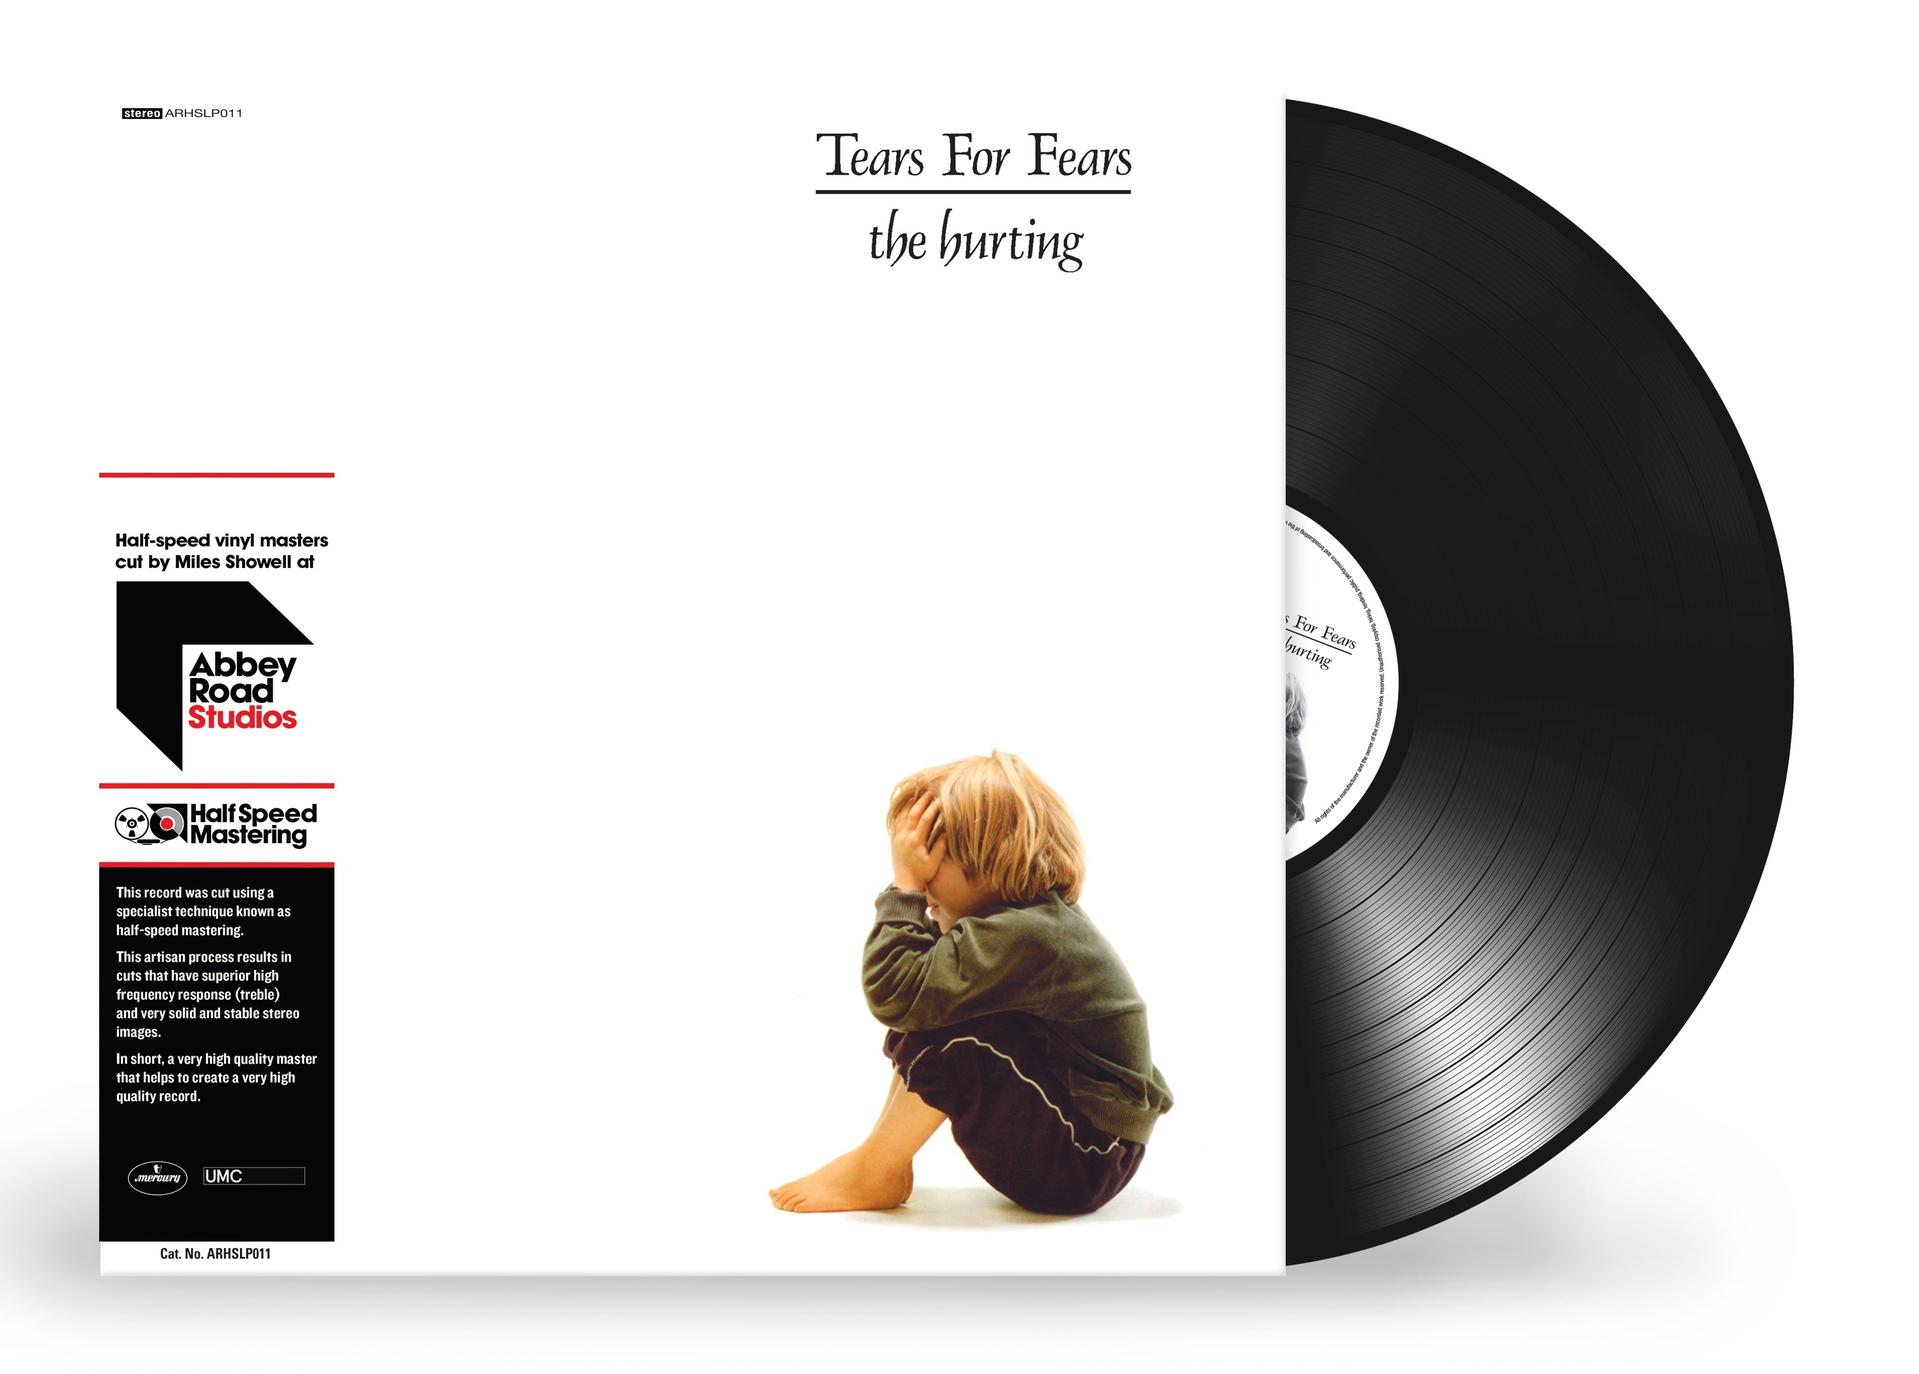 2021 Hurting For (Half-Speed Fears (Vinyl) - Tears Ltd.1LP) - Remastered The